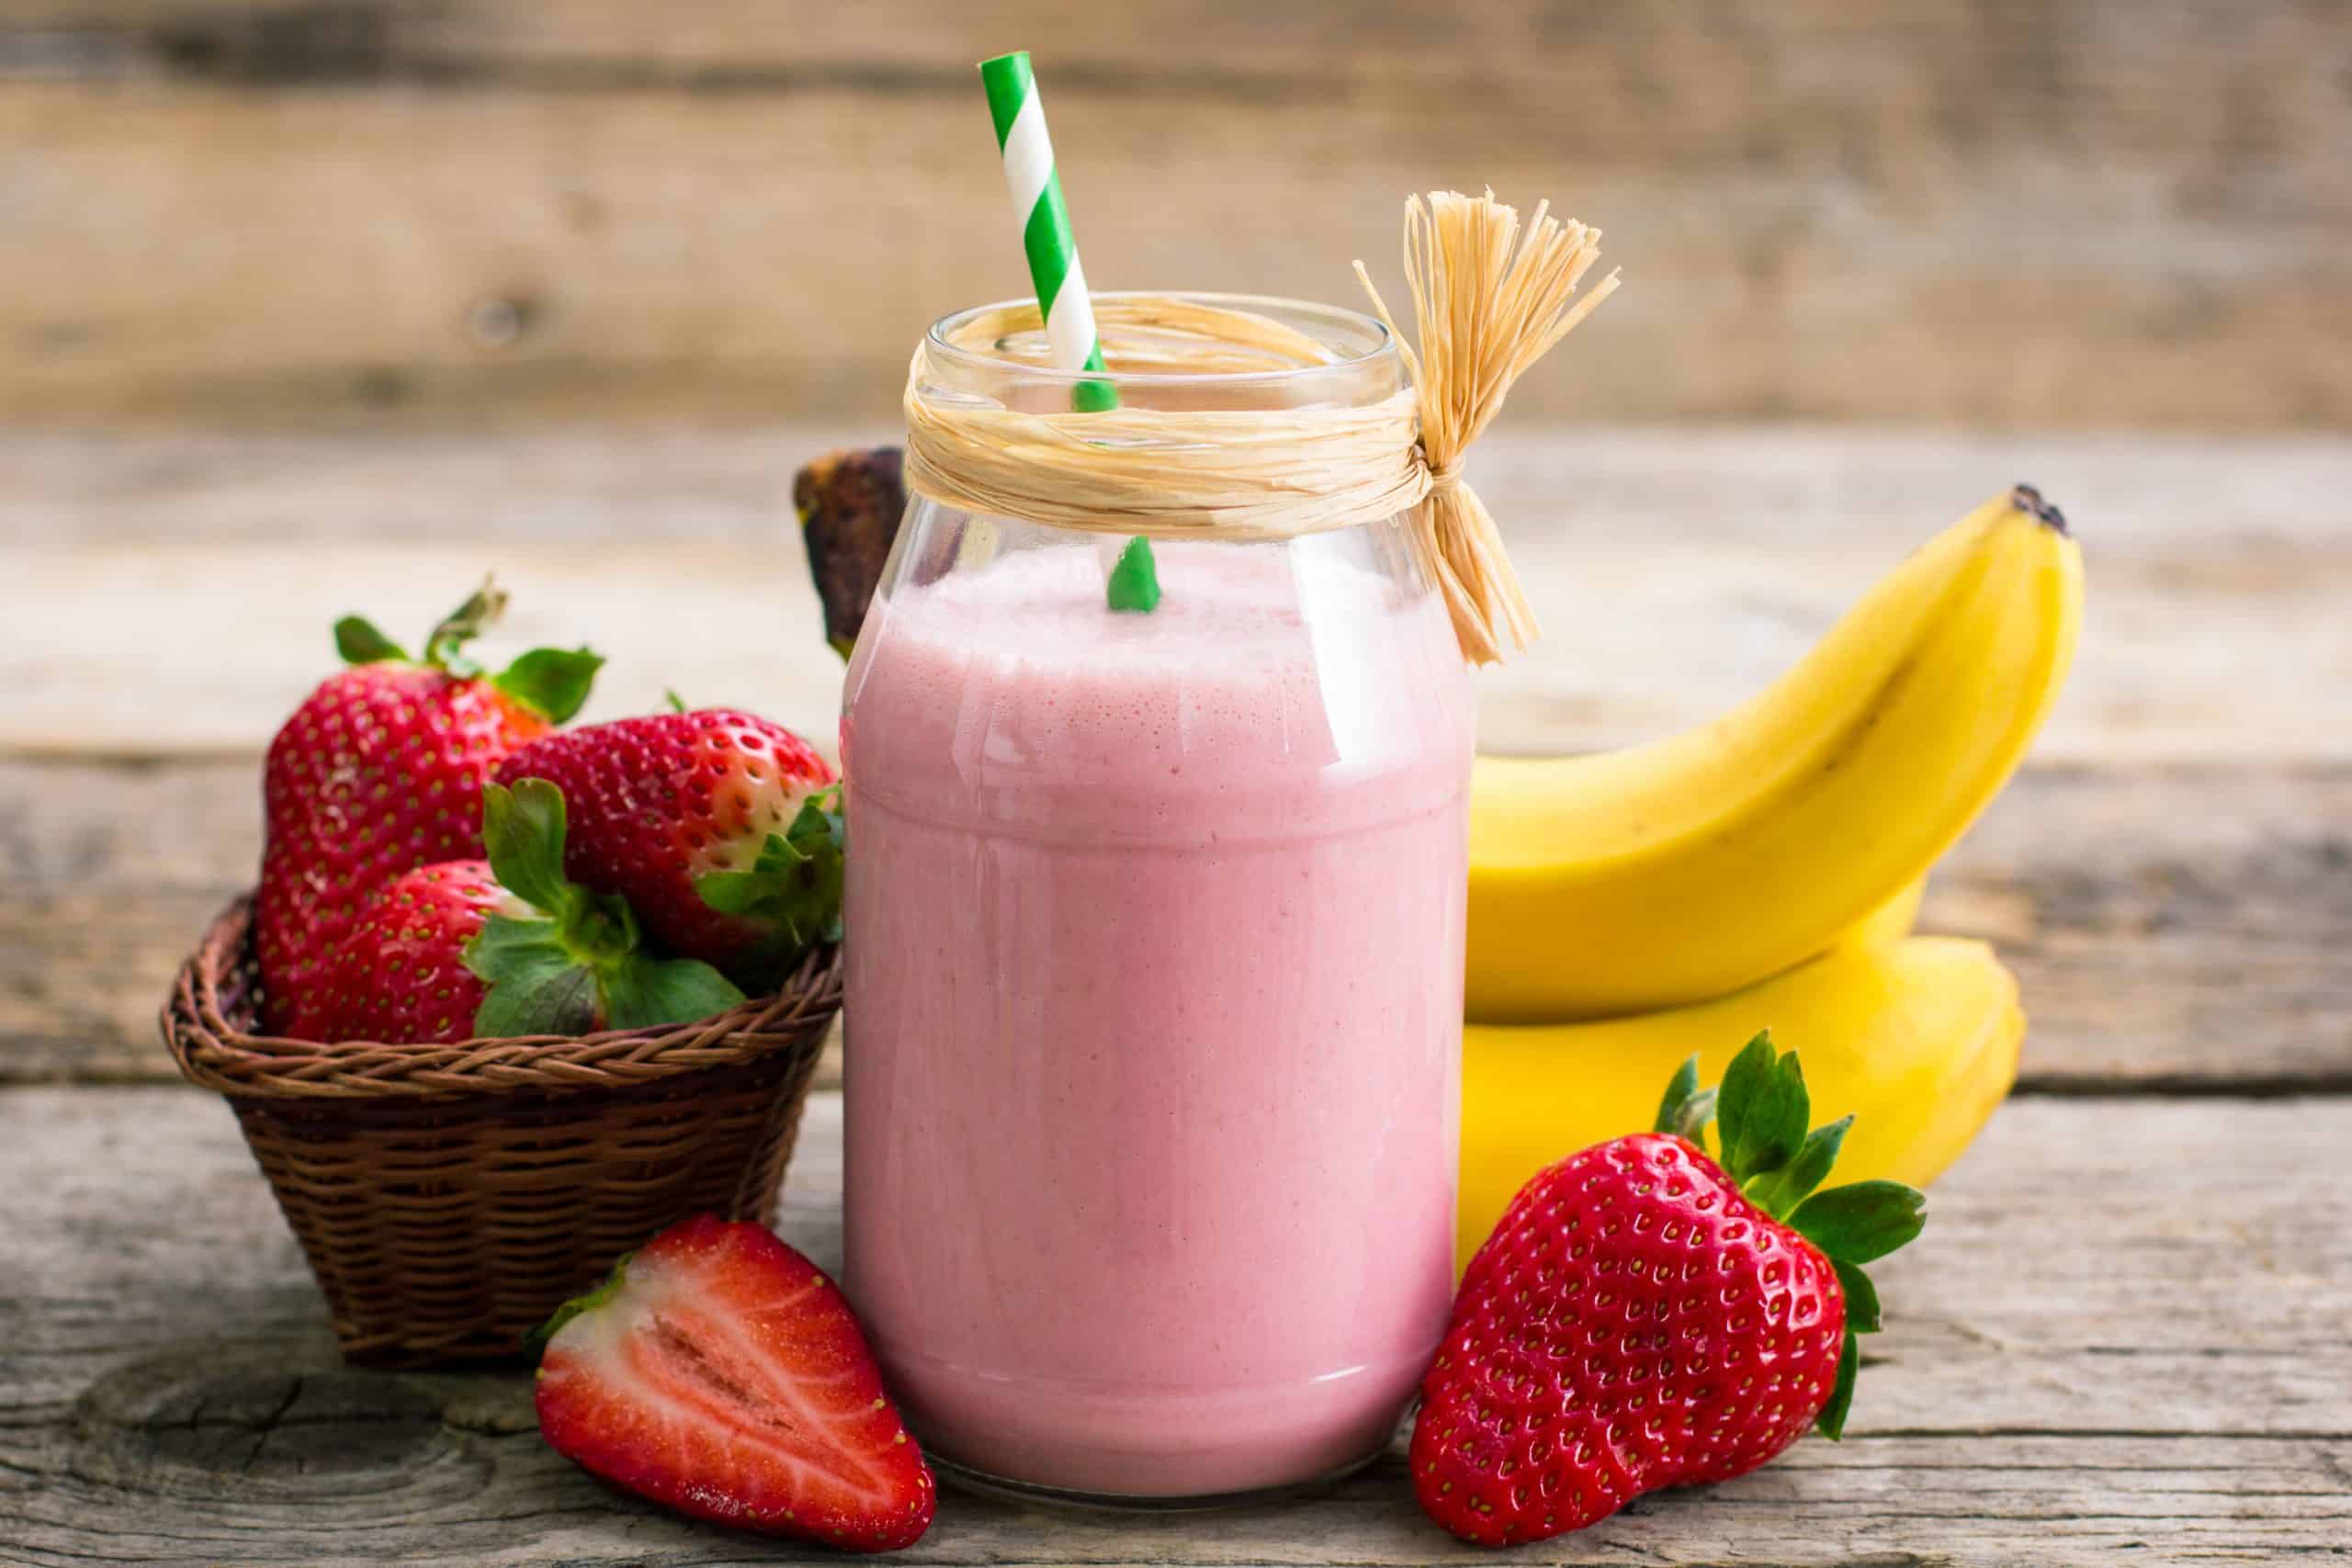 Is the Strawberry Banana Smoothie from McDonald's healthy?